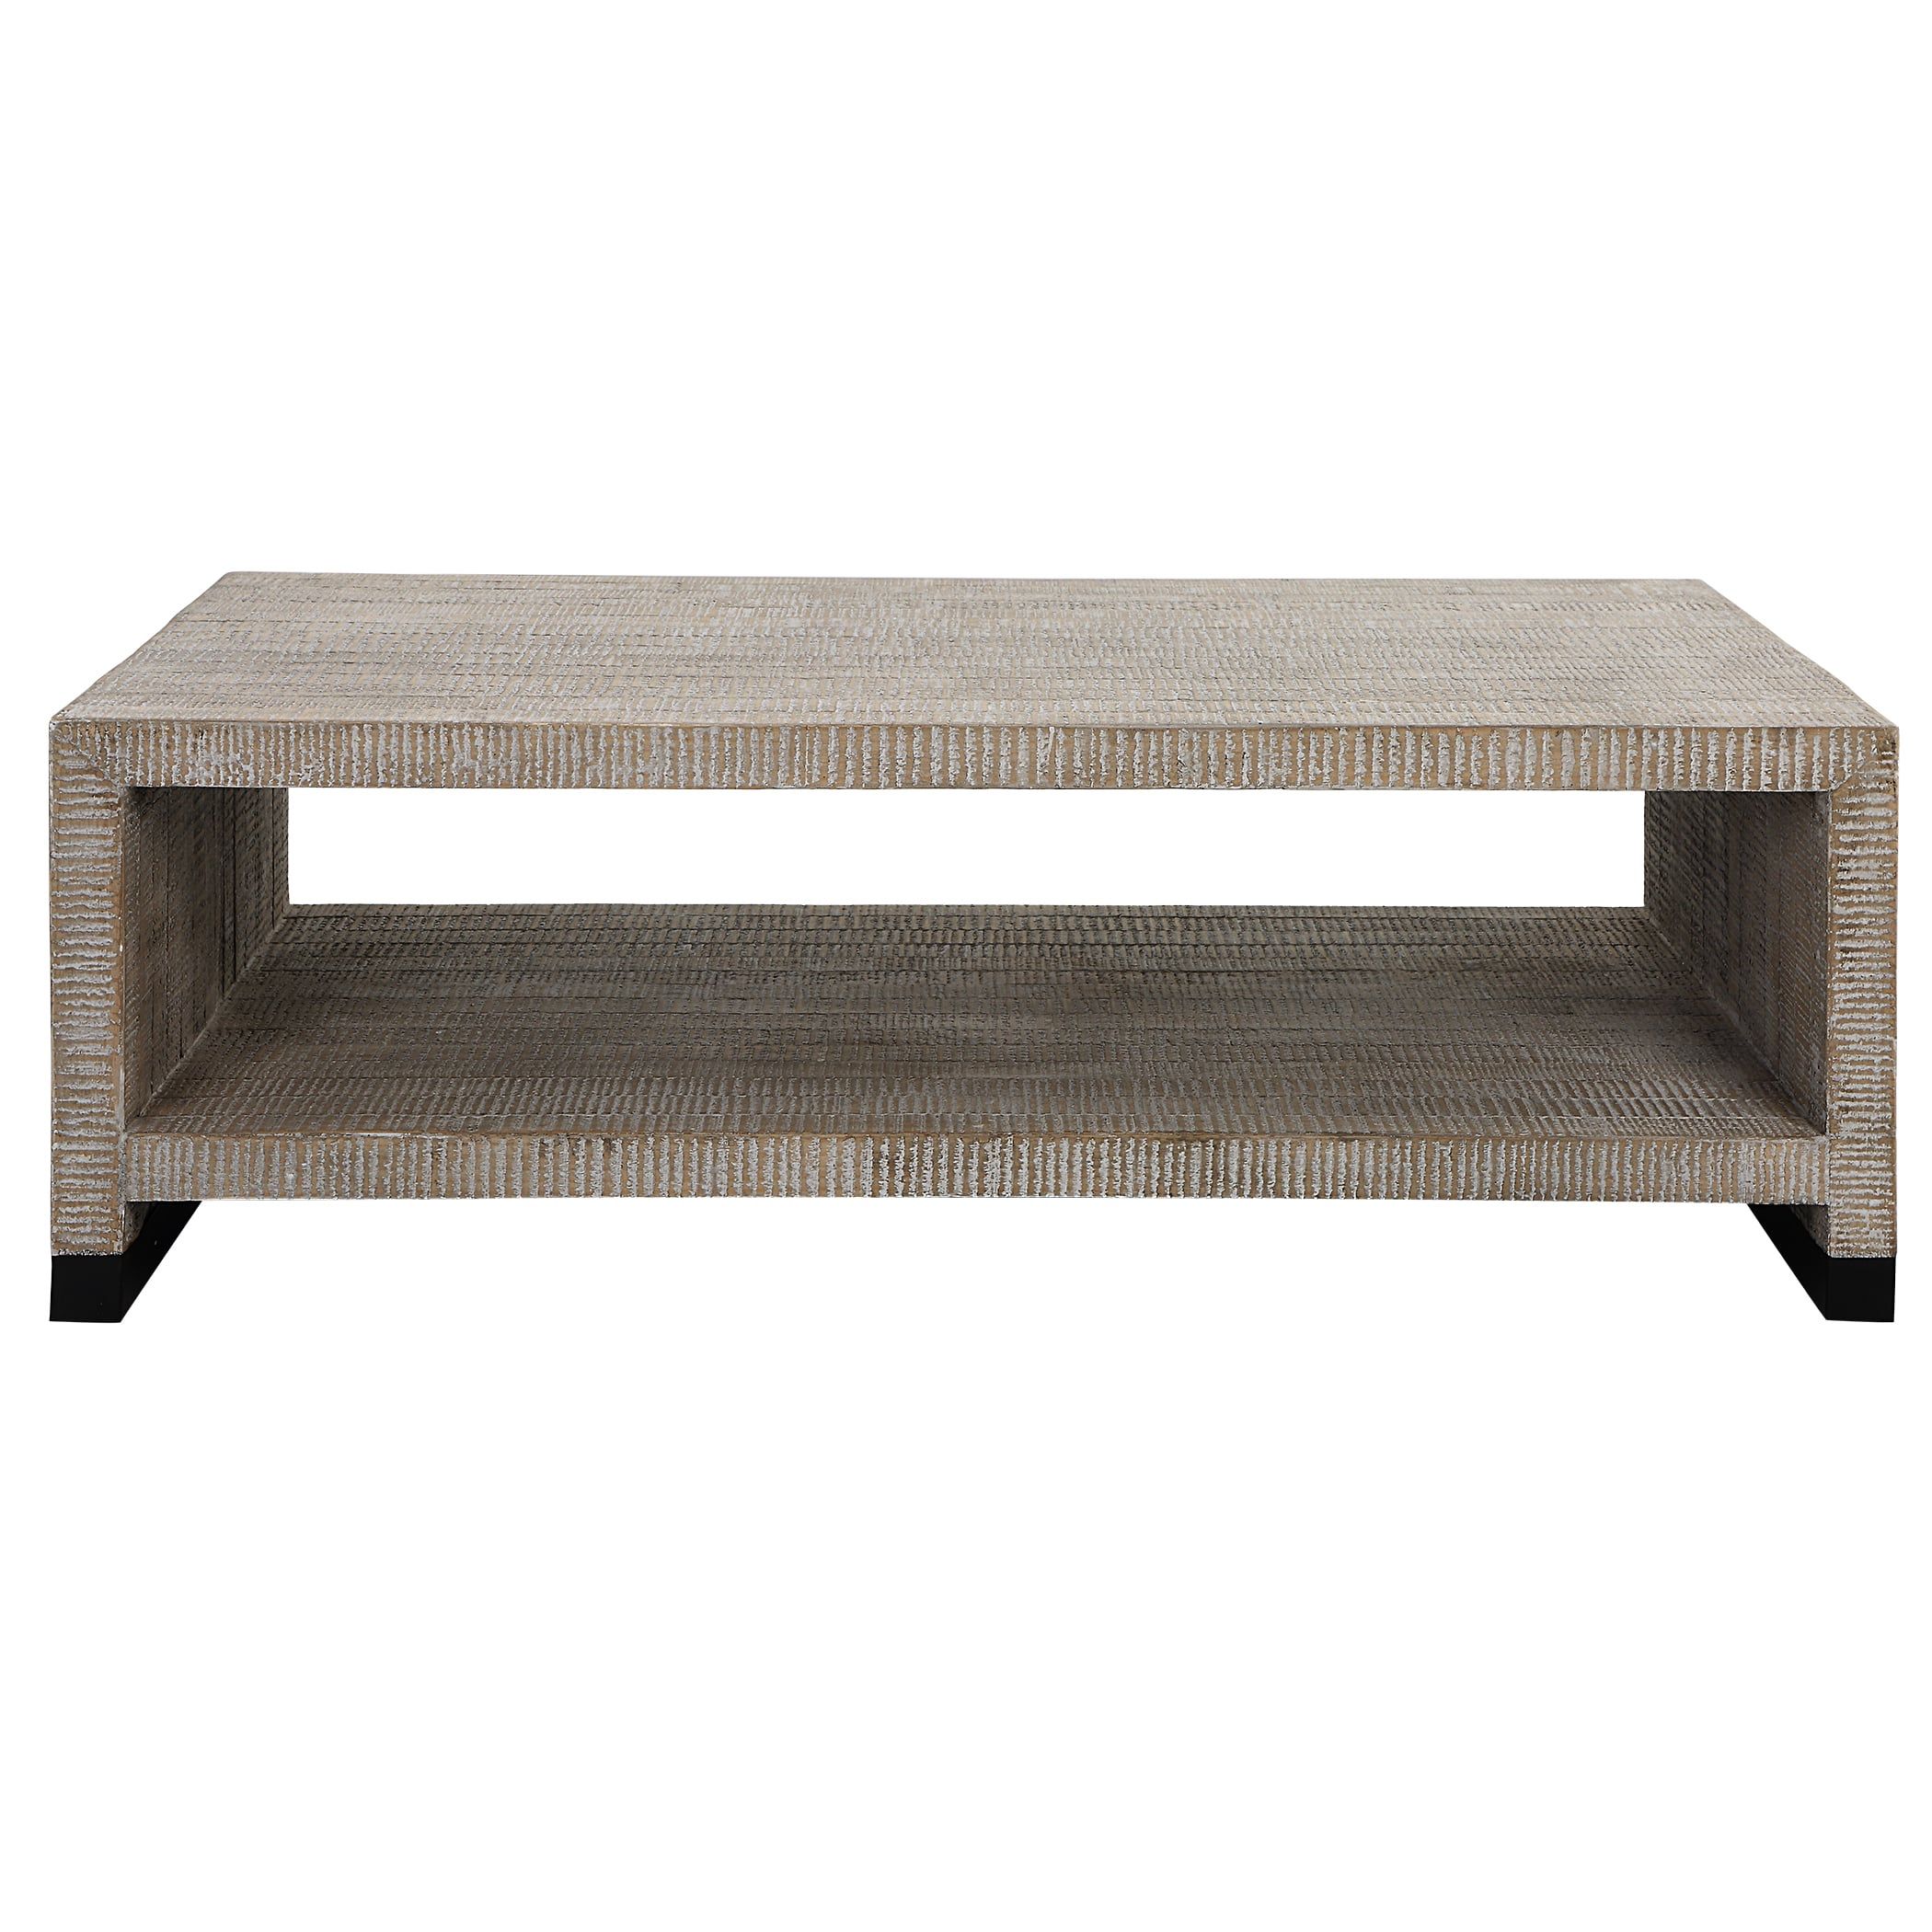 Uttermost Bosk Rustic White Washed Coffee Table With Open Shelving Throughout Coffee Tables With Open Storage Shelves (Photo 12 of 15)